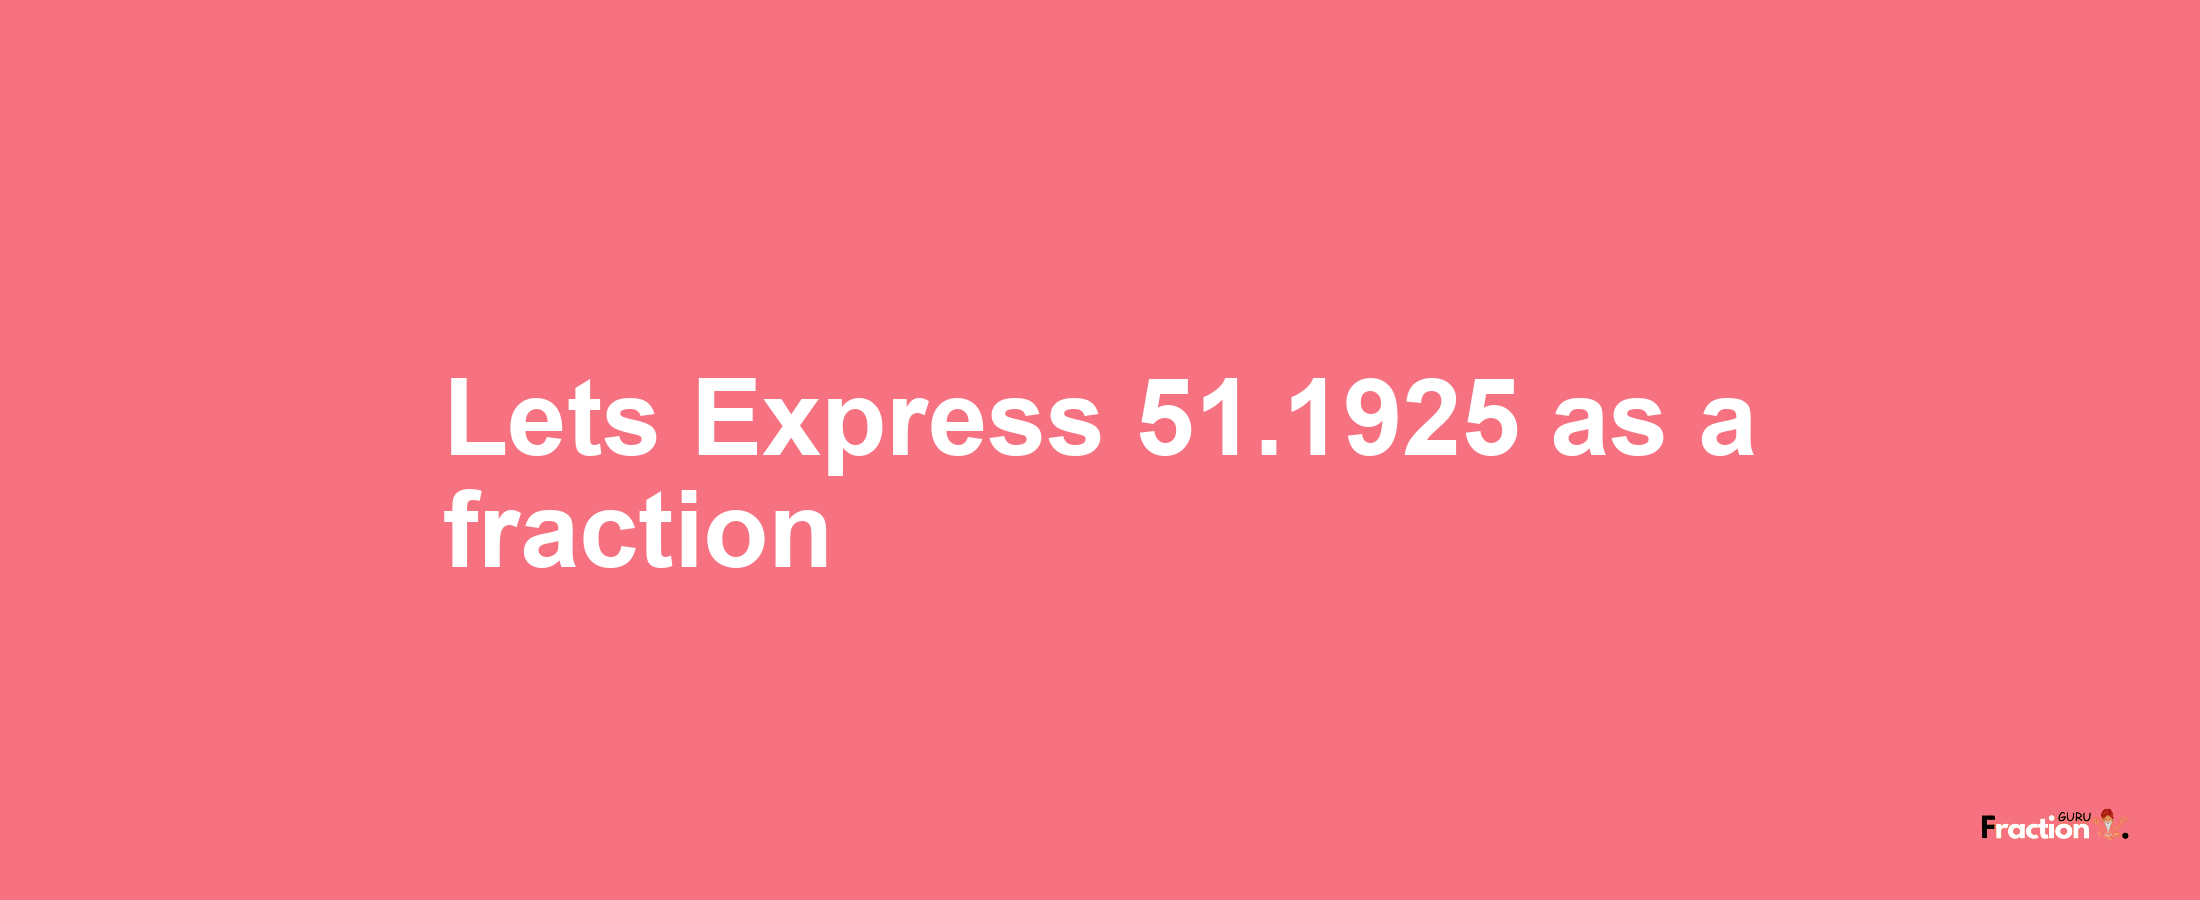 Lets Express 51.1925 as afraction